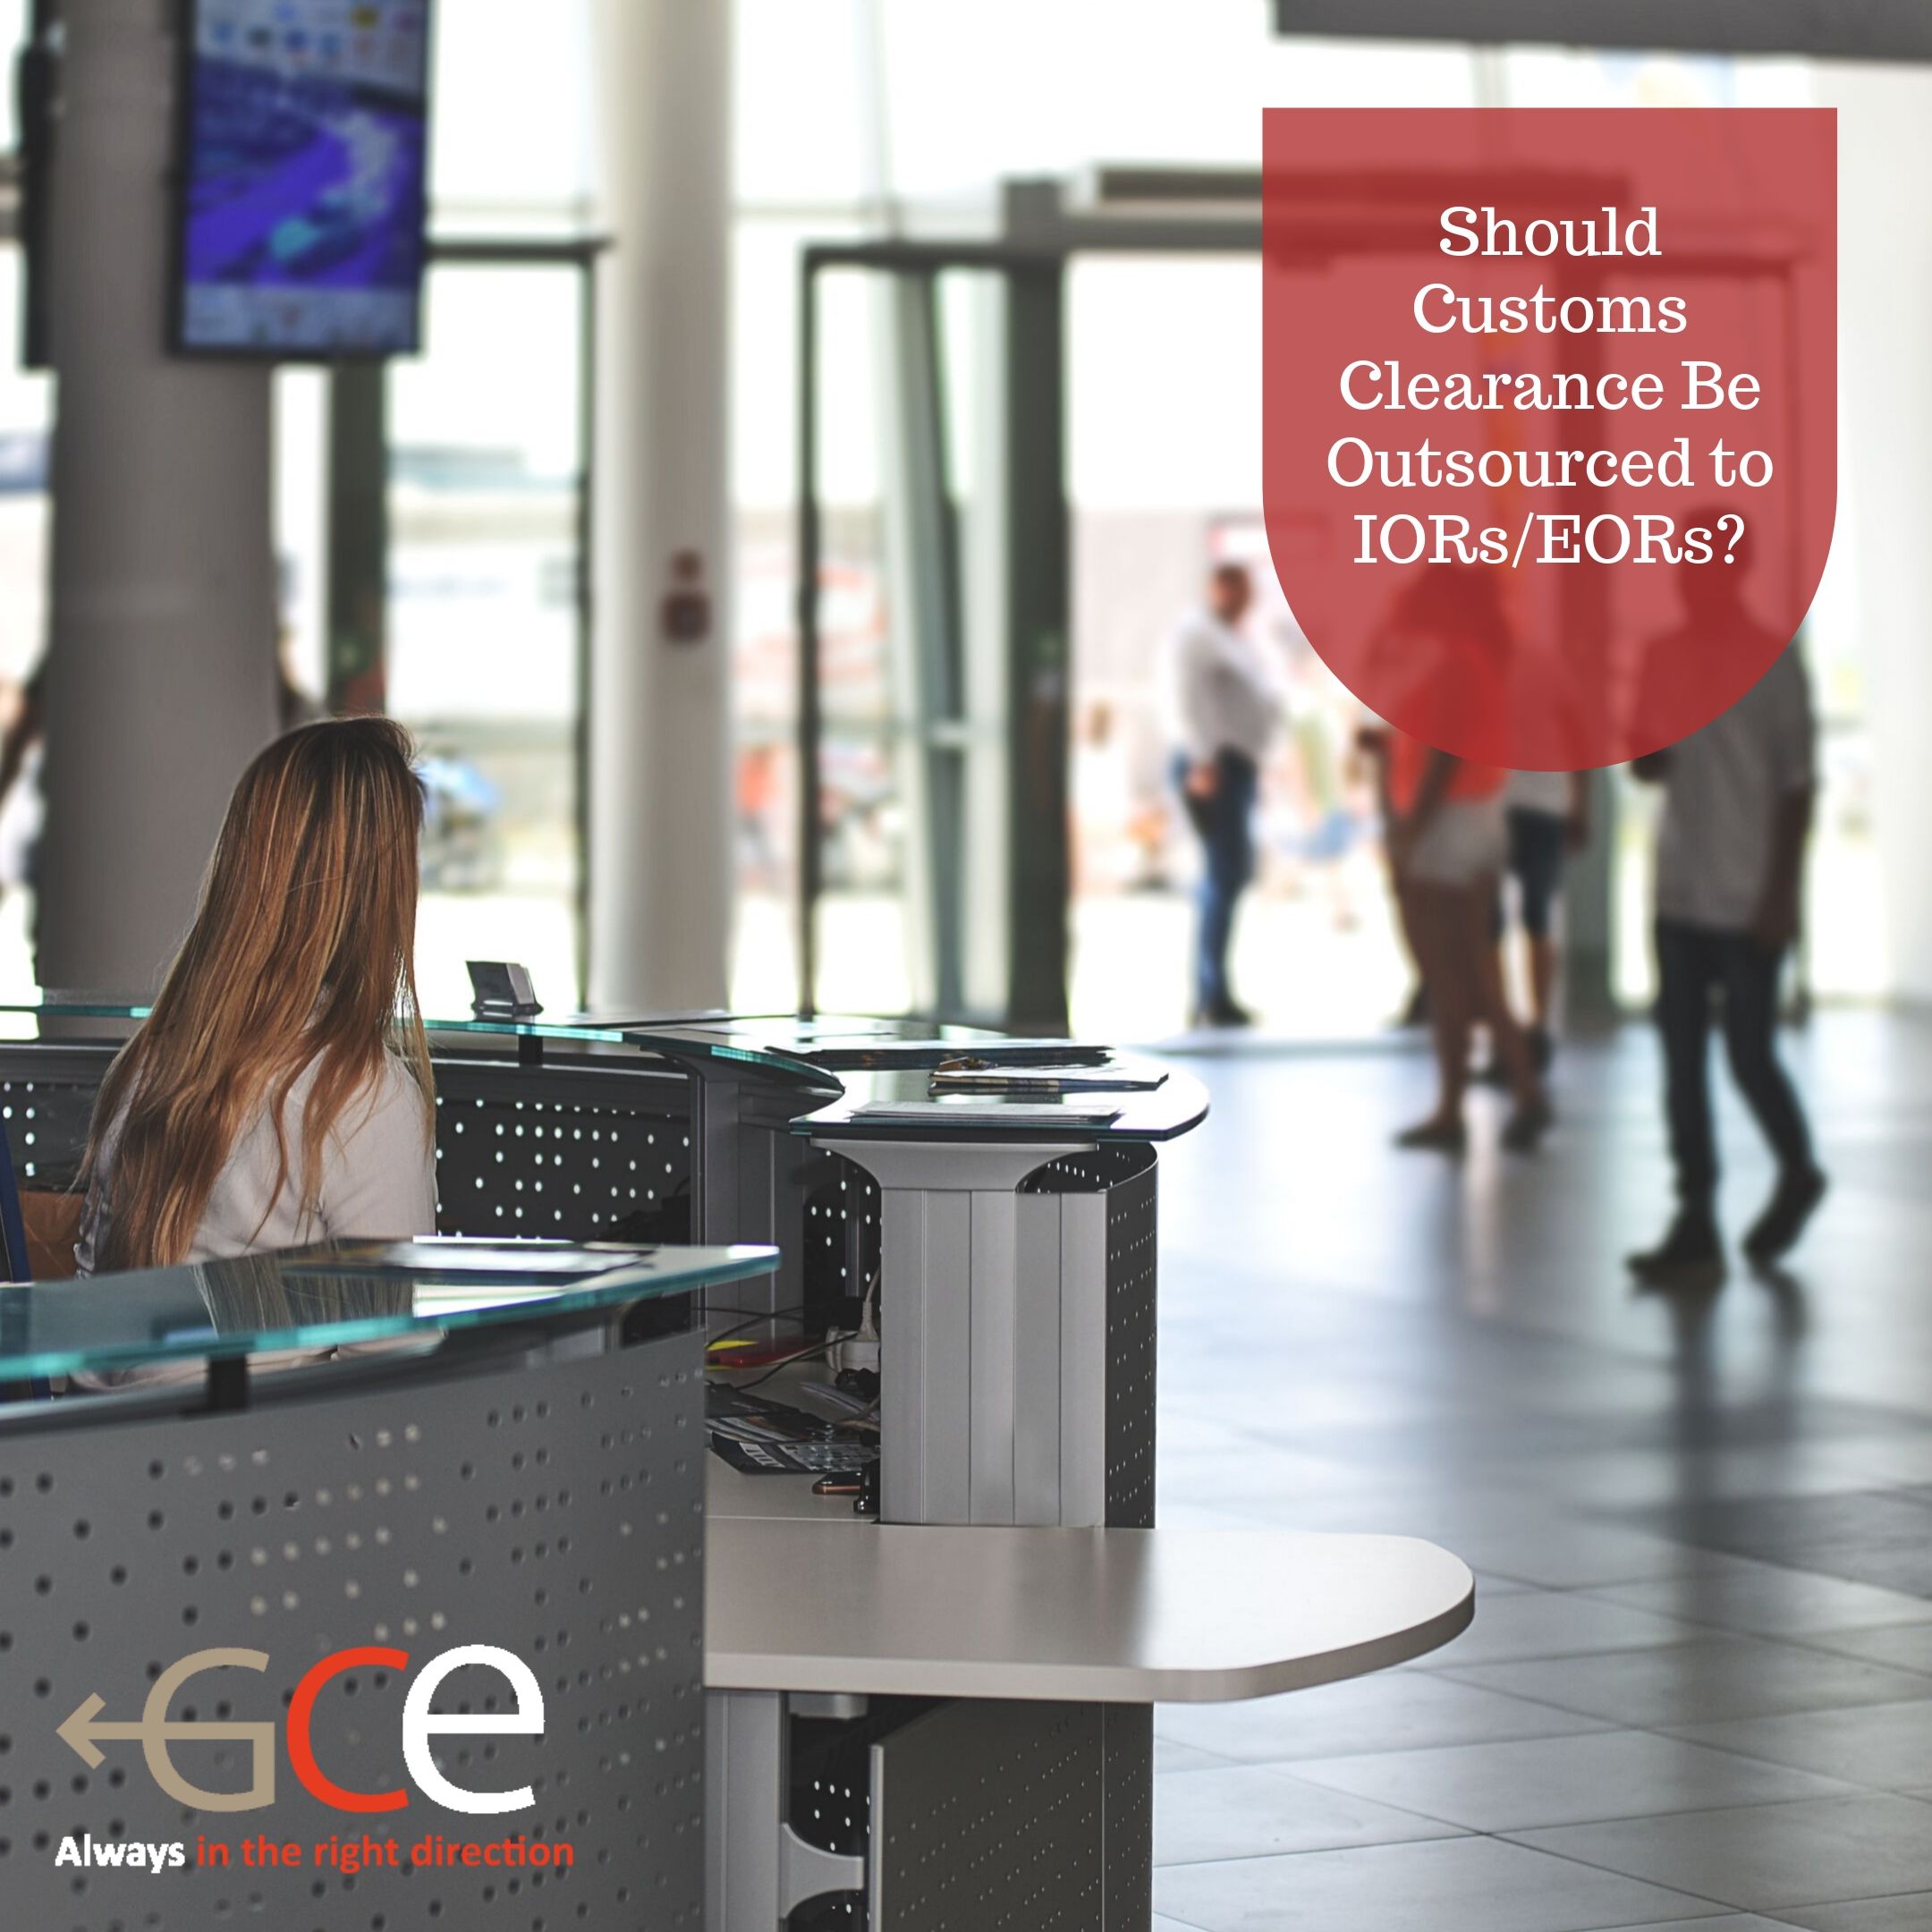 How to Decide If Custom Clearance Should Be Outsourced to IORsEORs - GCE Logistic